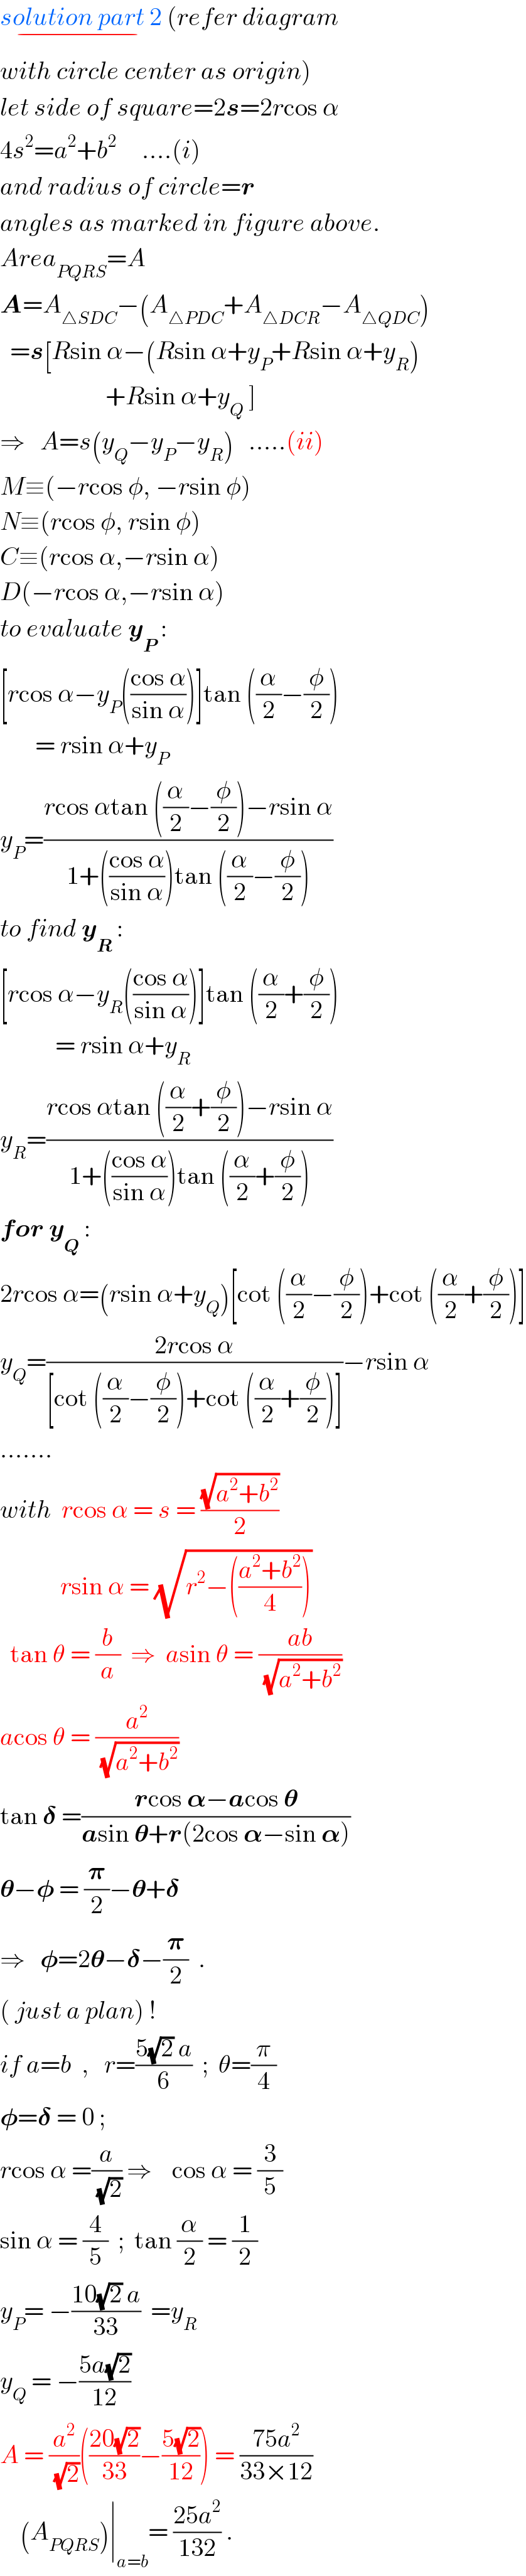 solution part 2_(−)  (refer diagram   with circle center as origin)  let side of square=2s=2rcos α  4s^2 =a^2 +b^2      ....(i)  and radius of circle=r  angles as marked in figure above.  Area_(PQRS) =A  A=A_(△SDC) −(A_(△PDC) +A_(△DCR) −A_(△QDC) )    =s[Rsin α−(Rsin α+y_P +Rsin α+y_R )                       +Rsin α+y_Q  ]  ⇒   A=s(y_Q −y_P −y_R )   .....(ii)  M≡(−rcos φ, −rsin φ)  N≡(rcos φ, rsin φ)  C≡(rcos α,−rsin α)  D(−rcos α,−rsin α)  to evaluate y_P  :  [rcos α−y_P (((cos α)/(sin α)))]tan ((α/2)−(φ/2))         = rsin α+y_P   y_P =((rcos αtan ((α/2)−(φ/2))−rsin α)/(1+(((cos α)/(sin α)))tan ((α/2)−(φ/2))))  to find y_R  :  [rcos α−y_R (((cos α)/(sin α)))]tan ((α/2)+(φ/2))             = rsin α+y_R   y_R =((rcos αtan ((α/2)+(φ/2))−rsin α)/(1+(((cos α)/(sin α)))tan ((α/2)+(φ/2))))  for y_Q  :  2rcos α=(rsin α+y_Q )[cot ((α/2)−(φ/2))+cot ((α/2)+(φ/2))]  y_Q =((2rcos α)/([cot ((α/2)−(φ/2))+cot ((α/2)+(φ/2))]))−rsin α  .......  with  rcos α = s = ((√(a^2 +b^2 ))/2)              rsin α = (√(r^2 −(((a^2 +b^2 )/4))))     tan θ = (b/a)  ⇒  asin θ = ((ab)/(√(a^2 +b^2 )))  acos θ = (a^2 /(√(a^2 +b^2 )))   tan 𝛅 =((rcos 𝛂−acos 𝛉)/(asin 𝛉+r(2cos 𝛂−sin 𝛂)))  𝛉−𝛗 = (𝛑/2)−𝛉+𝛅  ⇒   𝛗=2𝛉−𝛅−(𝛑/2)  .  ( just a plan) !  if a=b  ,   r=((5(√2) a)/6)  ;  θ=(π/4)   𝛗=𝛅 = 0 ;    rcos α =(a/(√2)) ⇒    cos α = (3/5)  sin α = (4/5)  ;  tan (α/2) = (1/2)  y_P = −((10(√2) a)/(33))  =y_R   y_Q  = −((5a(√2))/(12))  A = (a^2 /(√2))(((20(√2))/(33))−((5(√2))/(12))) = ((75a^2 )/(33×12))      (A_(PQRS) )∣_(a=b) = ((25a^2 )/(132)) .  